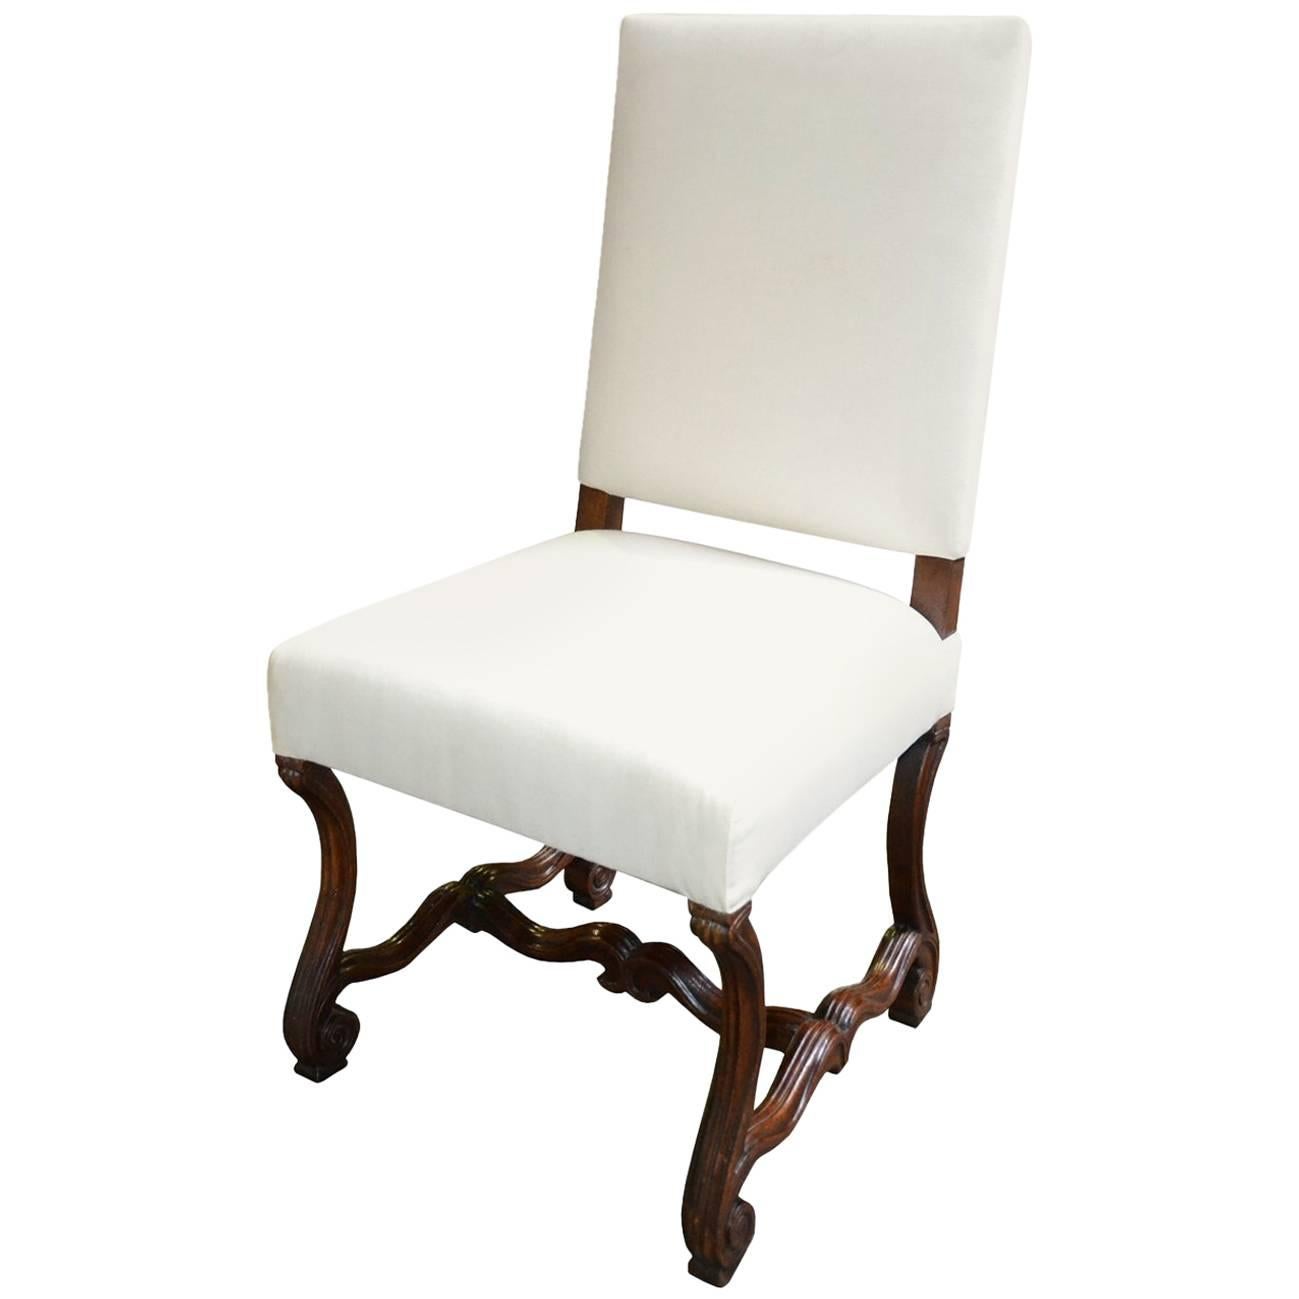 Antique Poltrona Side Chair For Sale